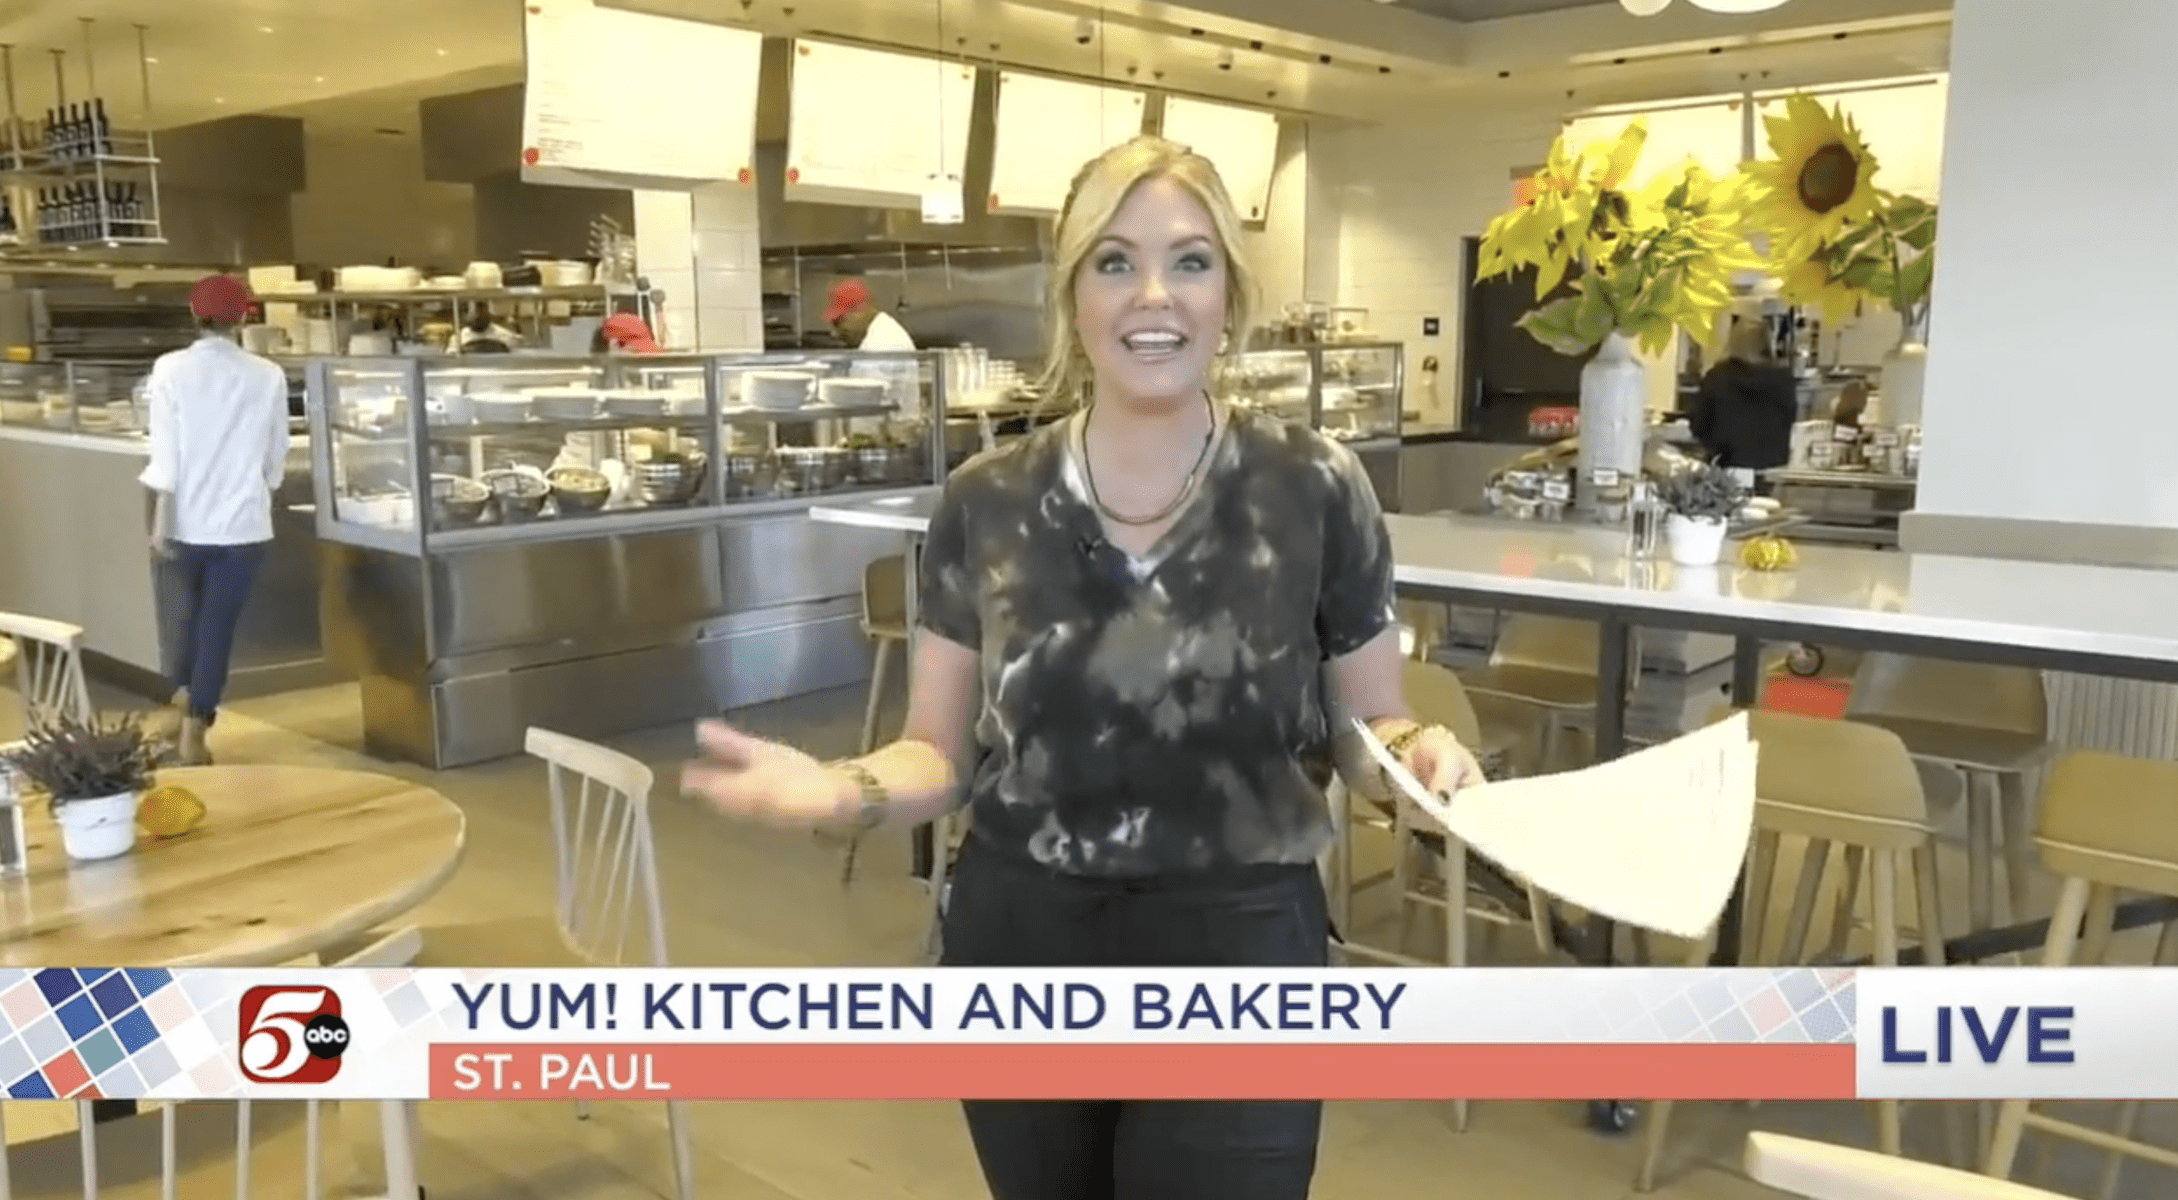 yum! Kitchen and Bakery featured on KTSP's new segment, Megs and Eggs, filmed at the St. Paul location.